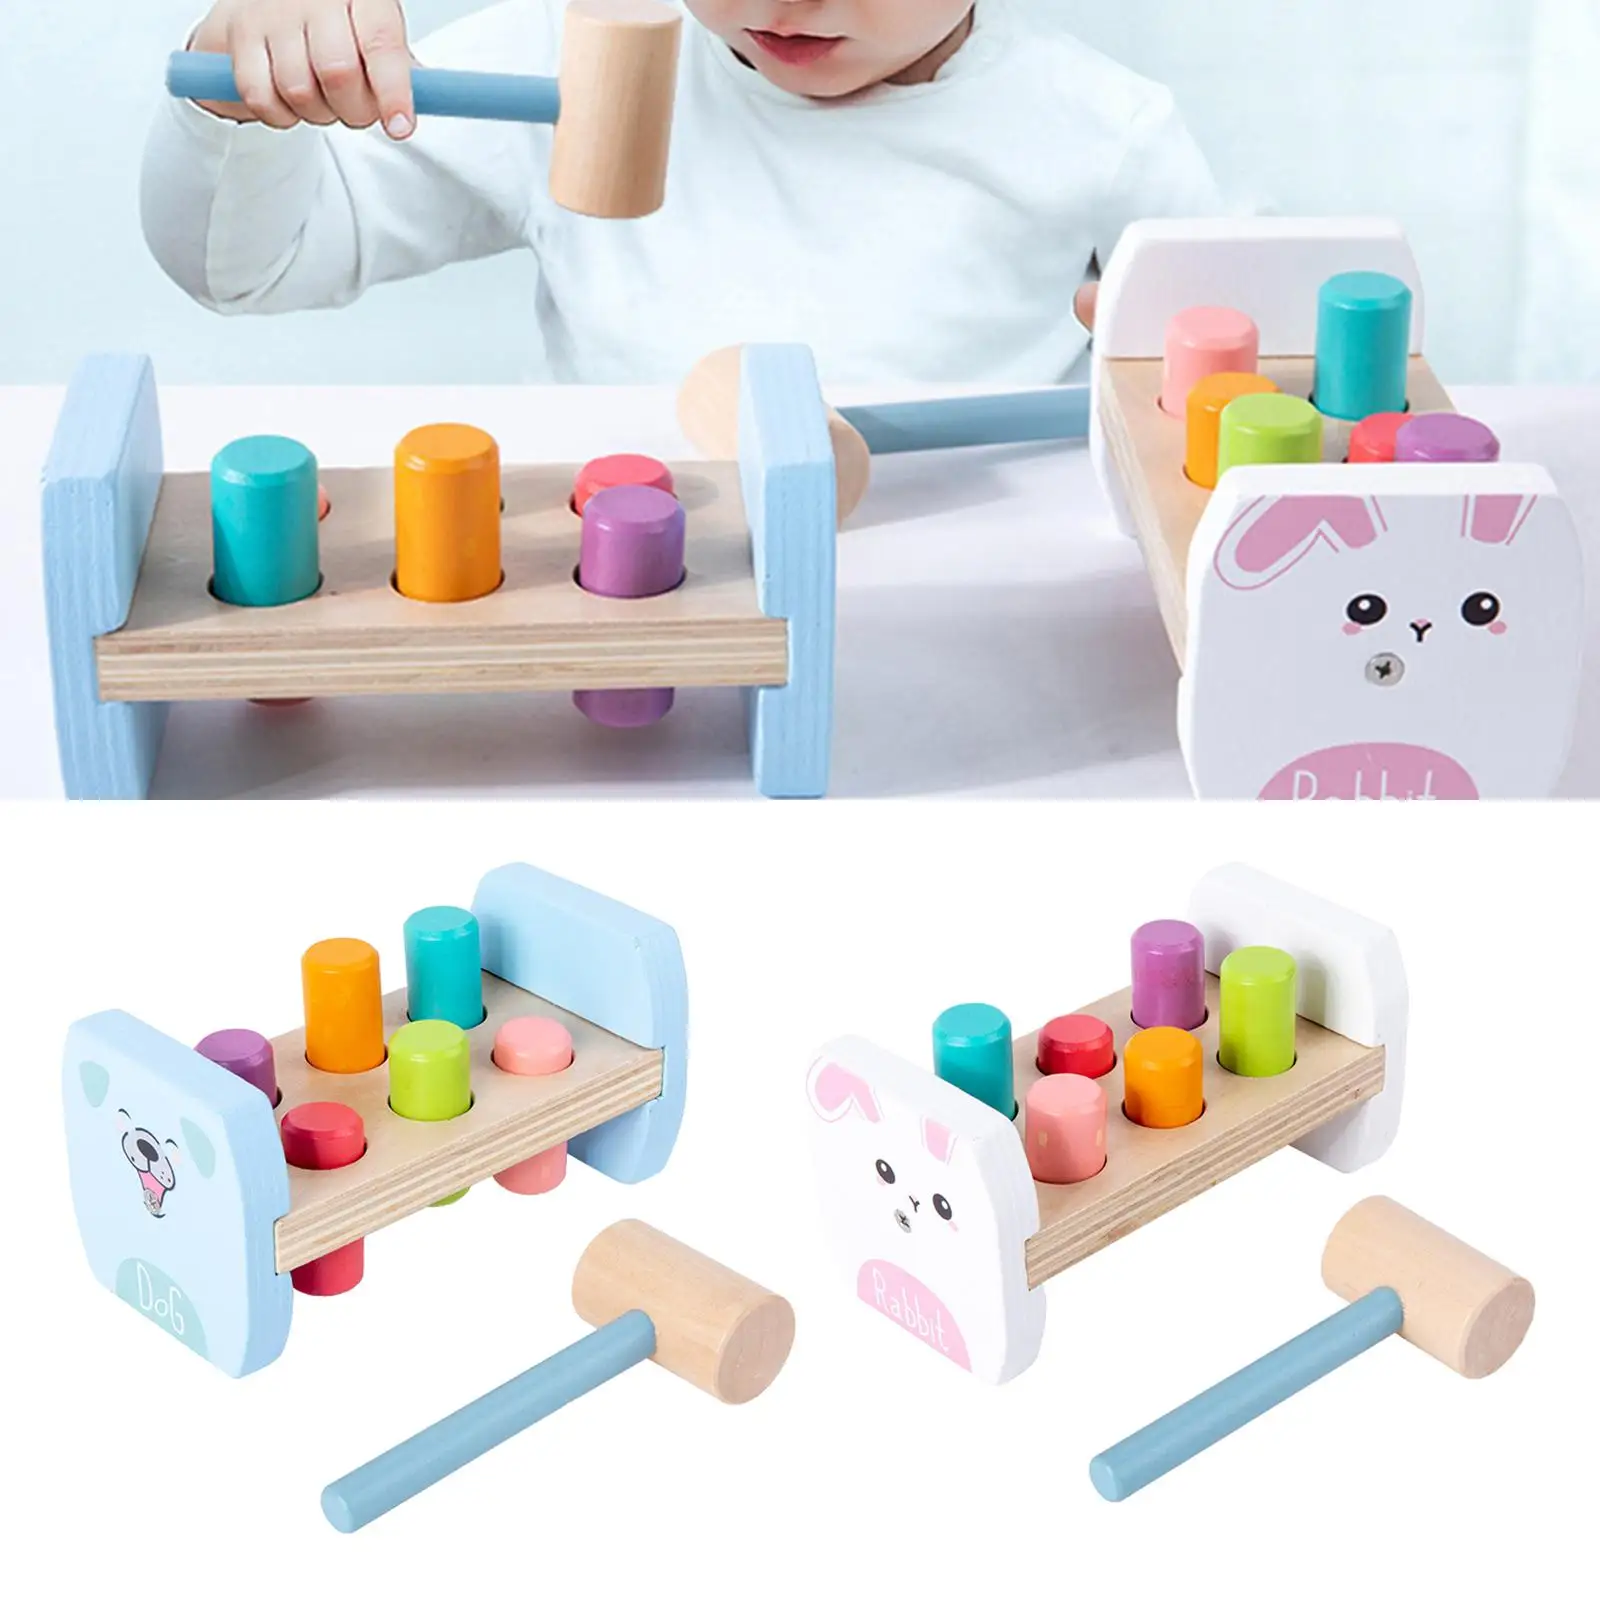 Wooden Pounding Educational Activity Toys for Ages 3+ Kids